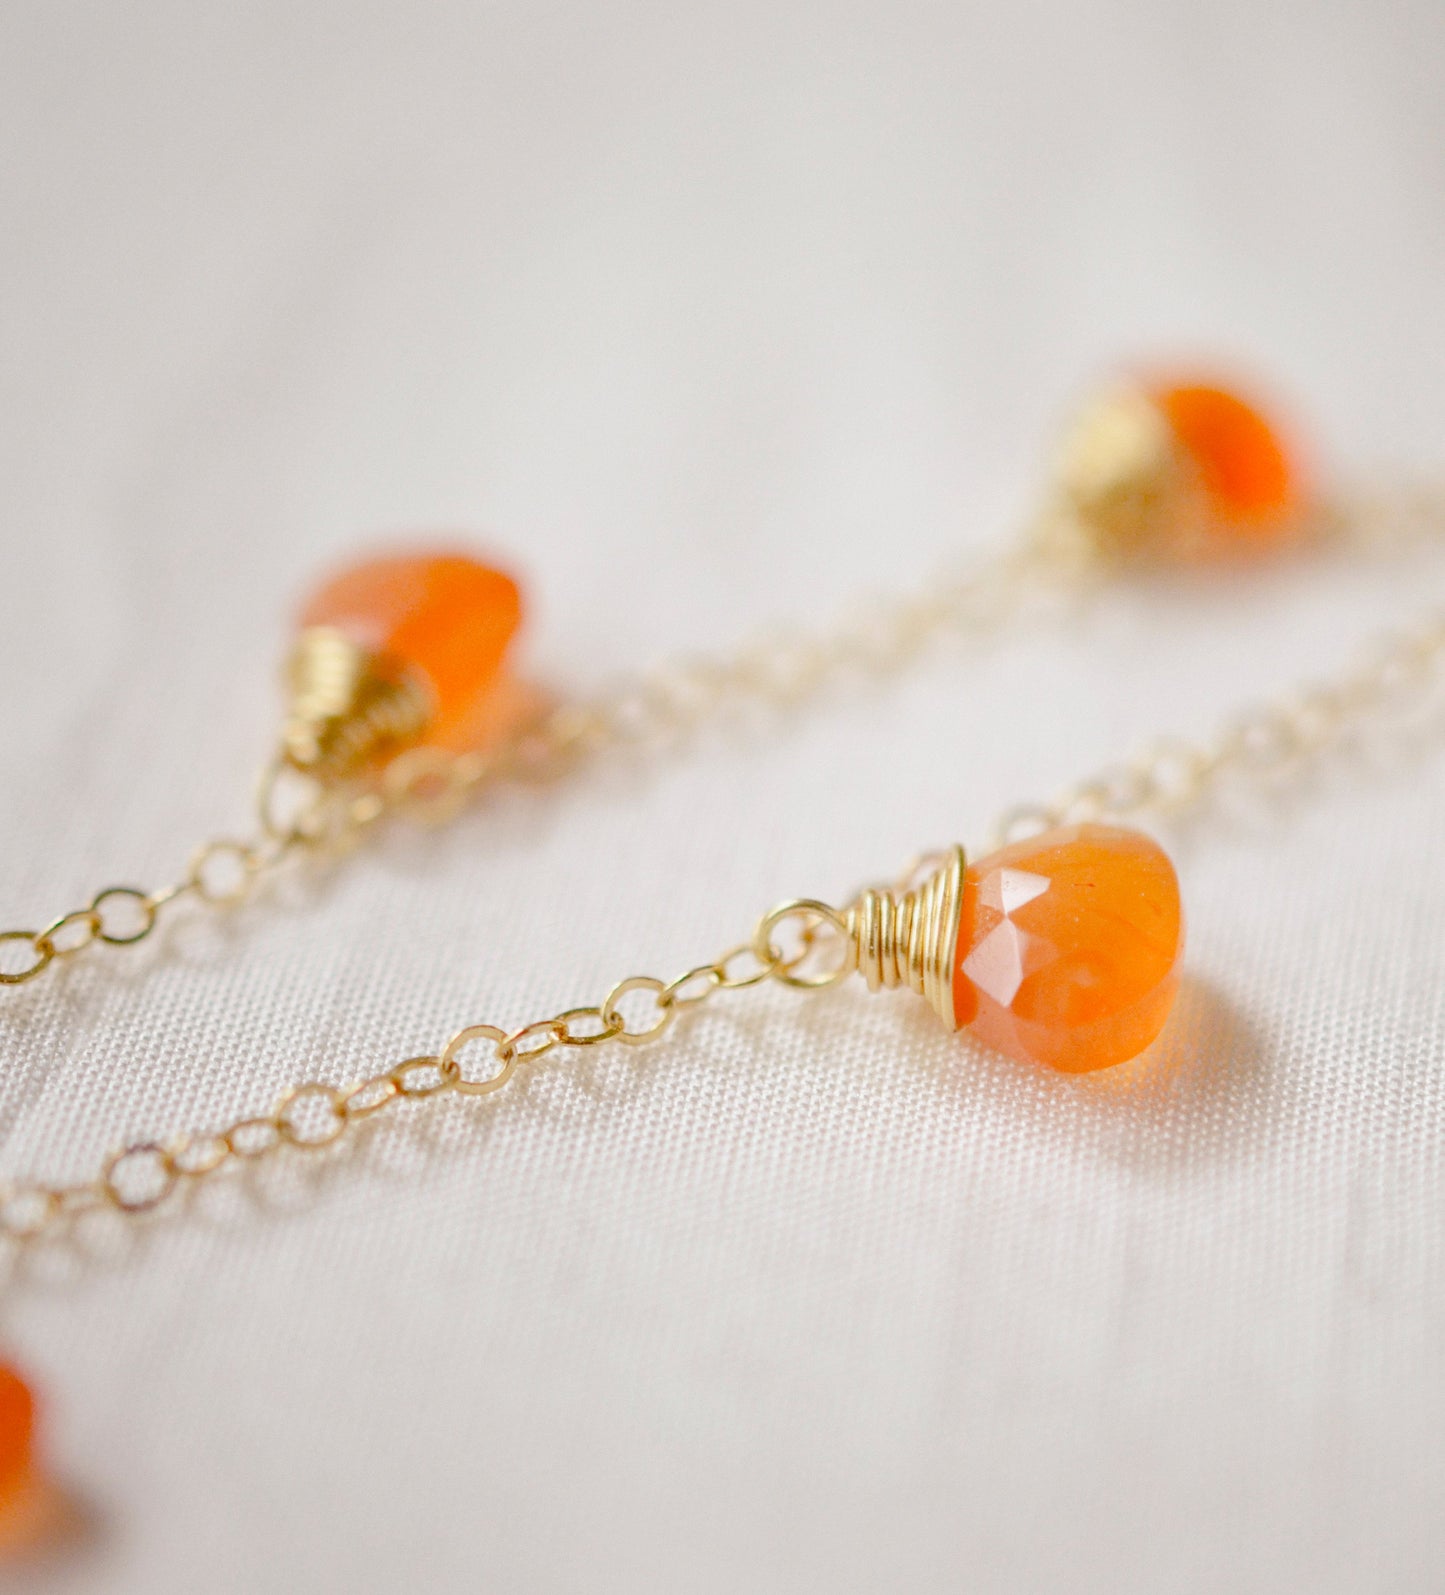 Handmade necklace featuring nine natural Carnelian gemstones set onto a gold filled chain. Sterling Silver is also available. Close up image.